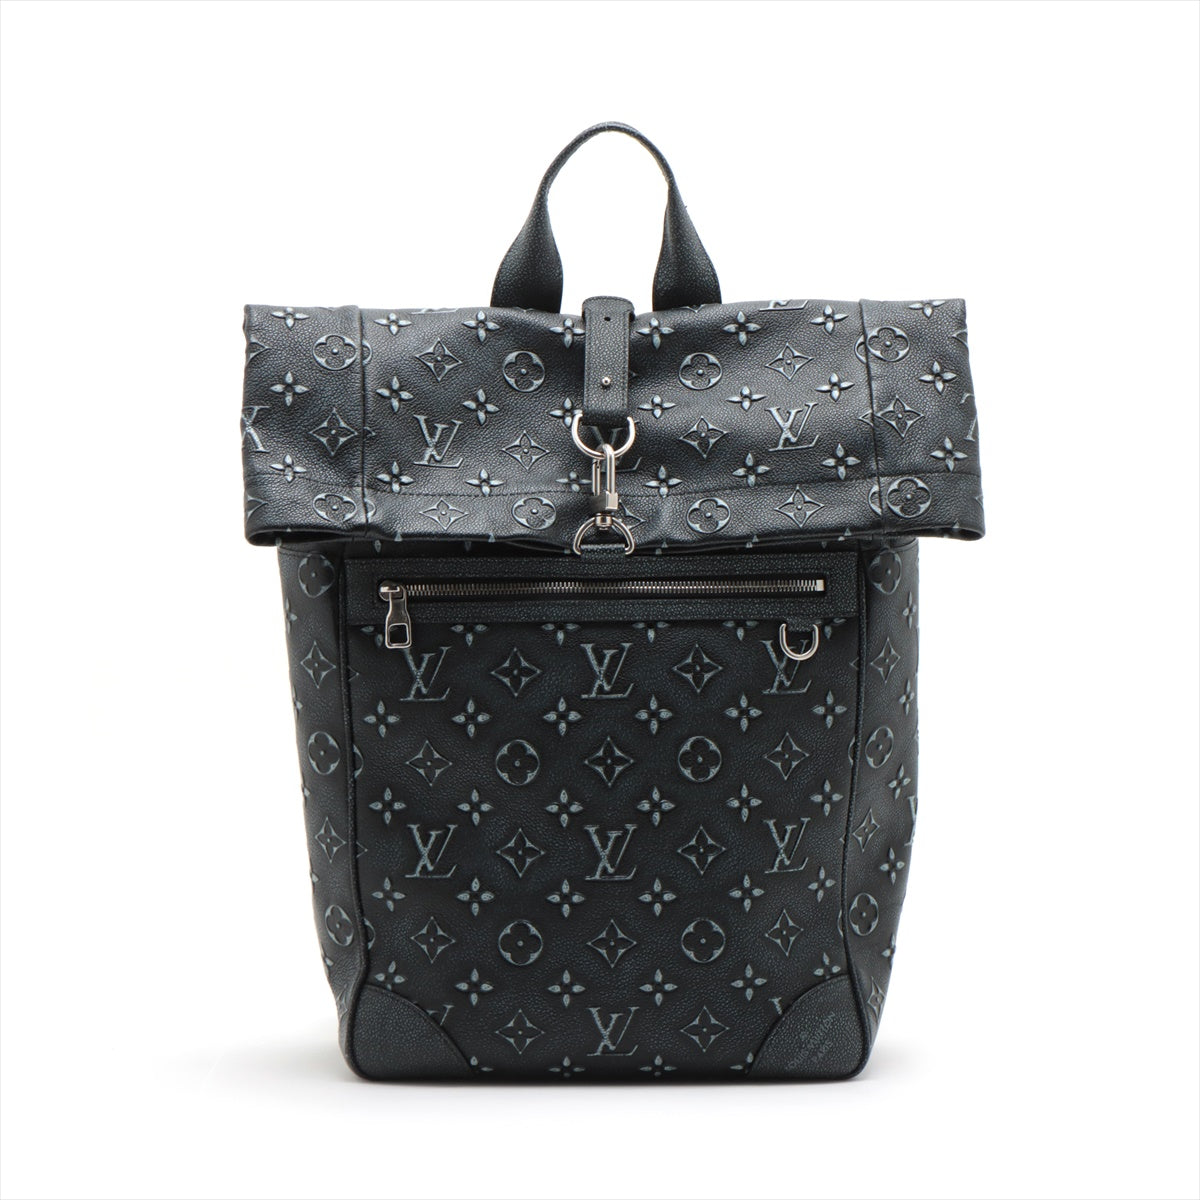 Louis Vuitton Monogram Devos roll top Backpack M21359 There was an RFID response